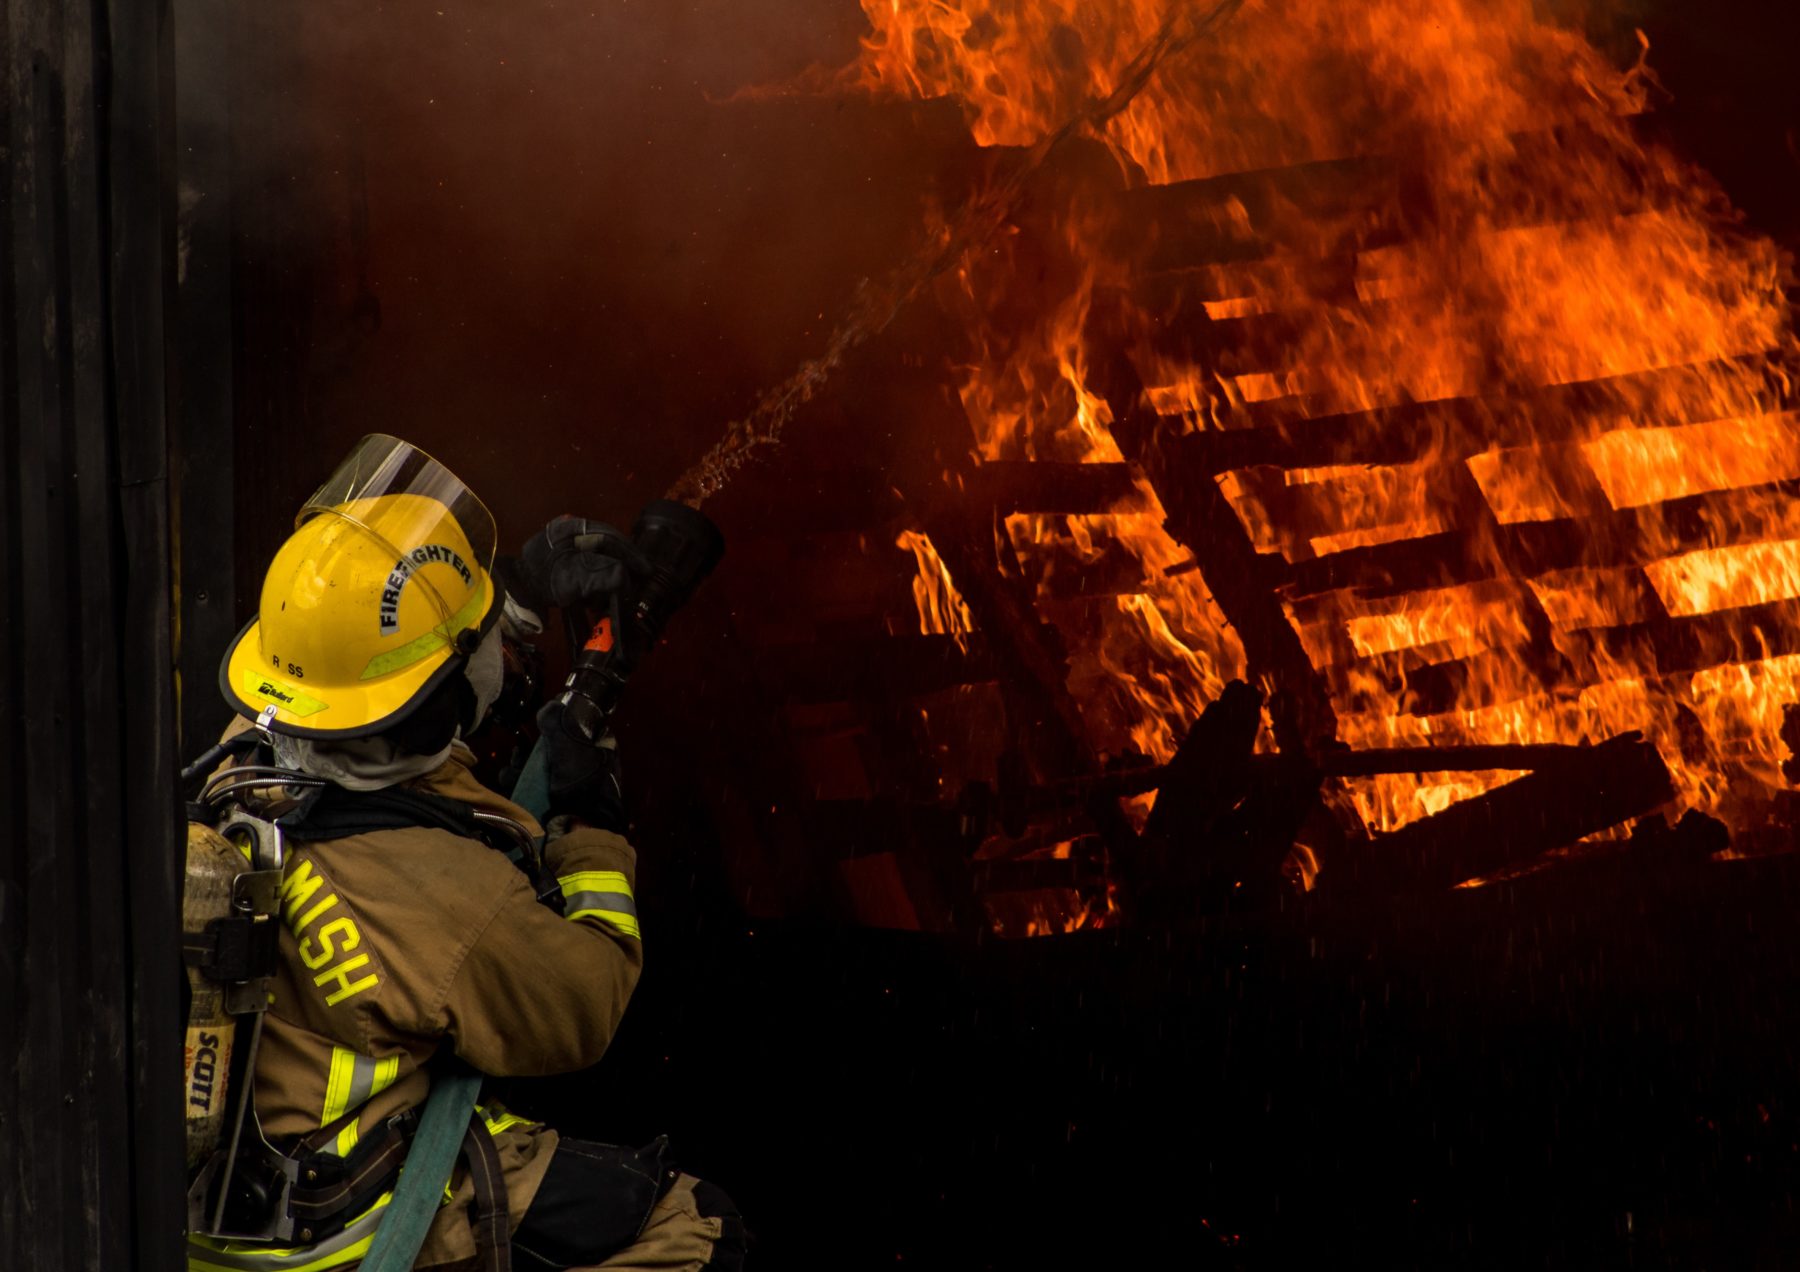 Image of a firefighter spraying water on a pile of burning wood